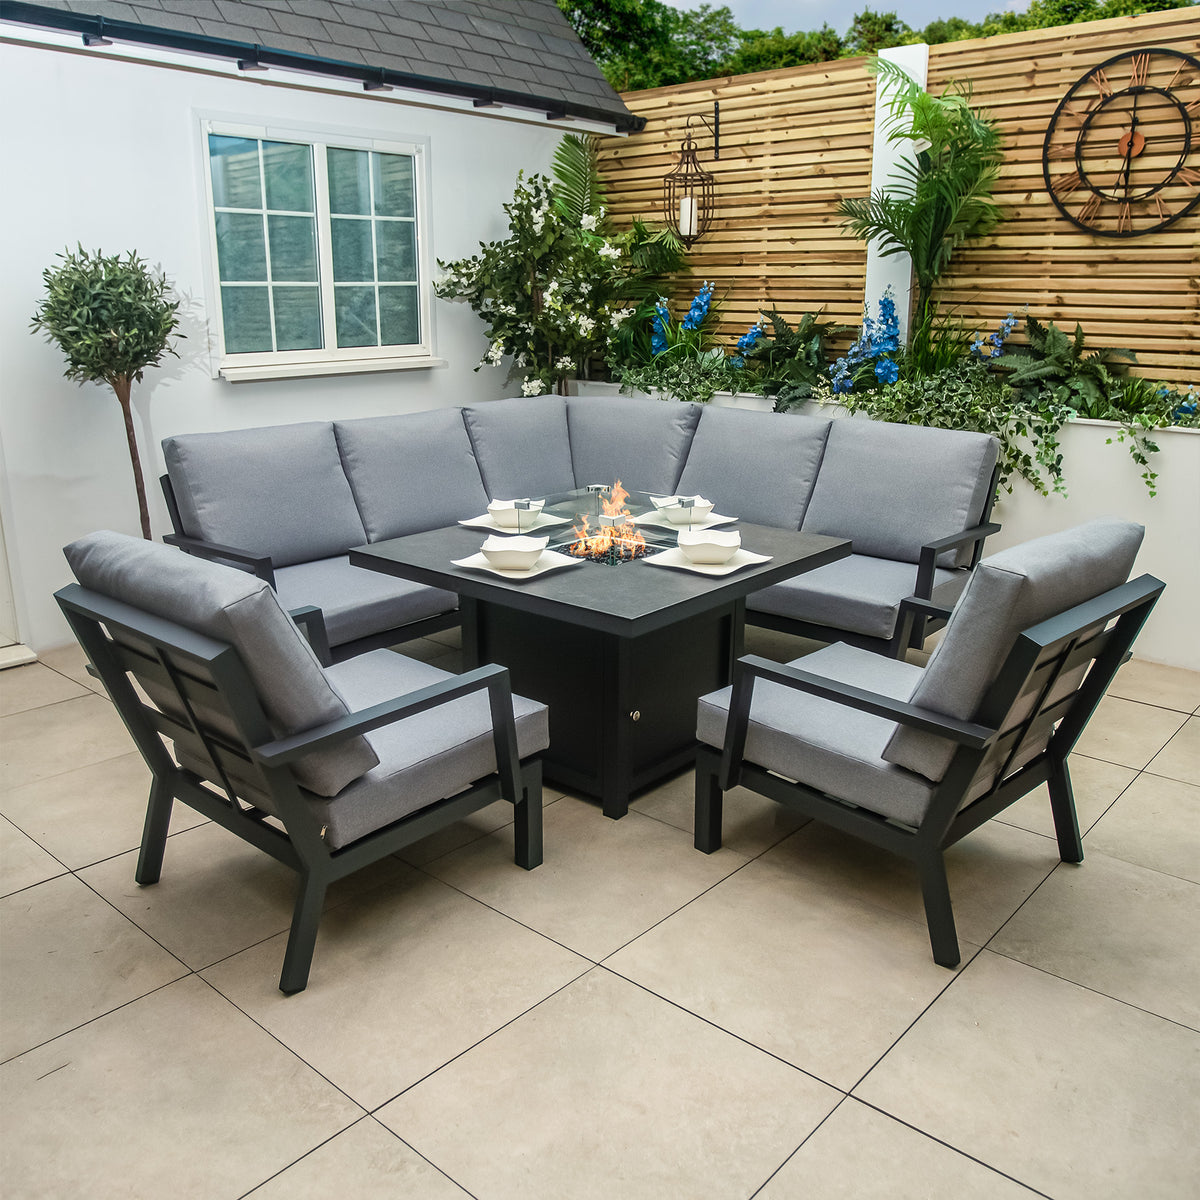 Bracken Outdoors Miami Dark Aluminium Compact Corner Set with Fire Pit Table and 2 Arm Chairs